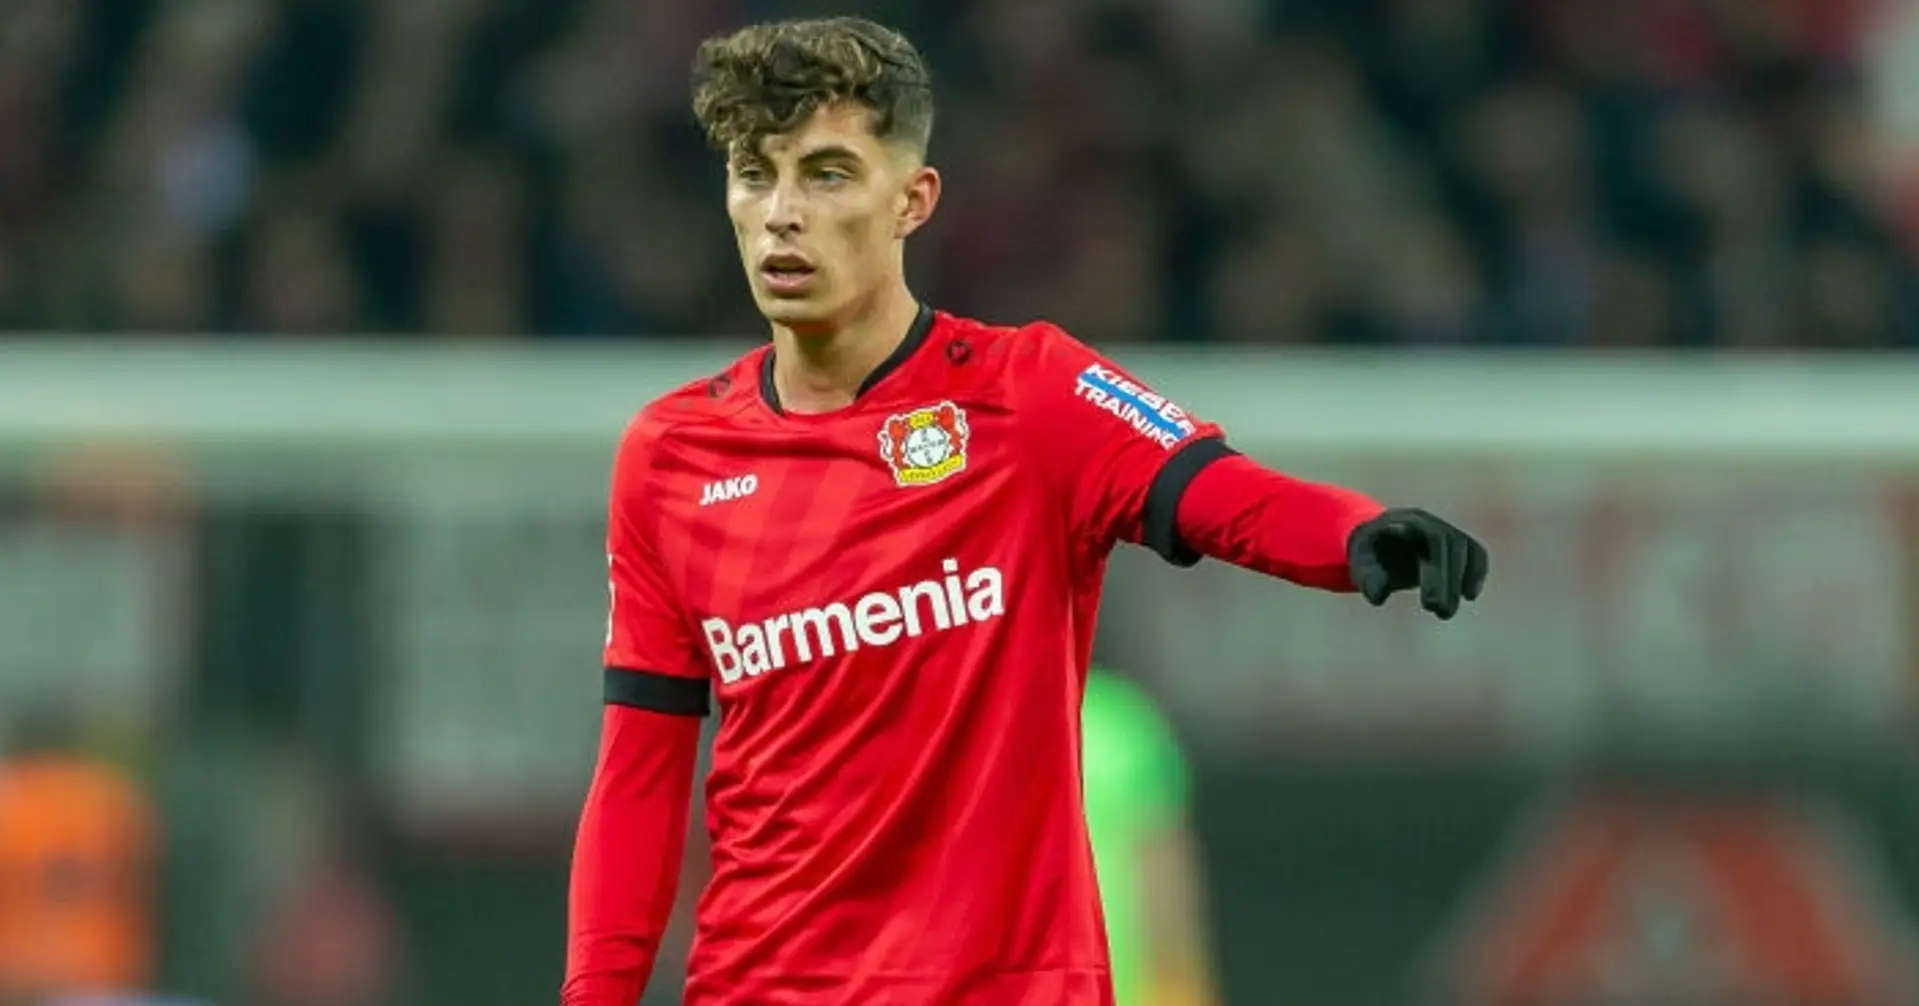 2 possible reasons for dragging out Havertz’s transfer